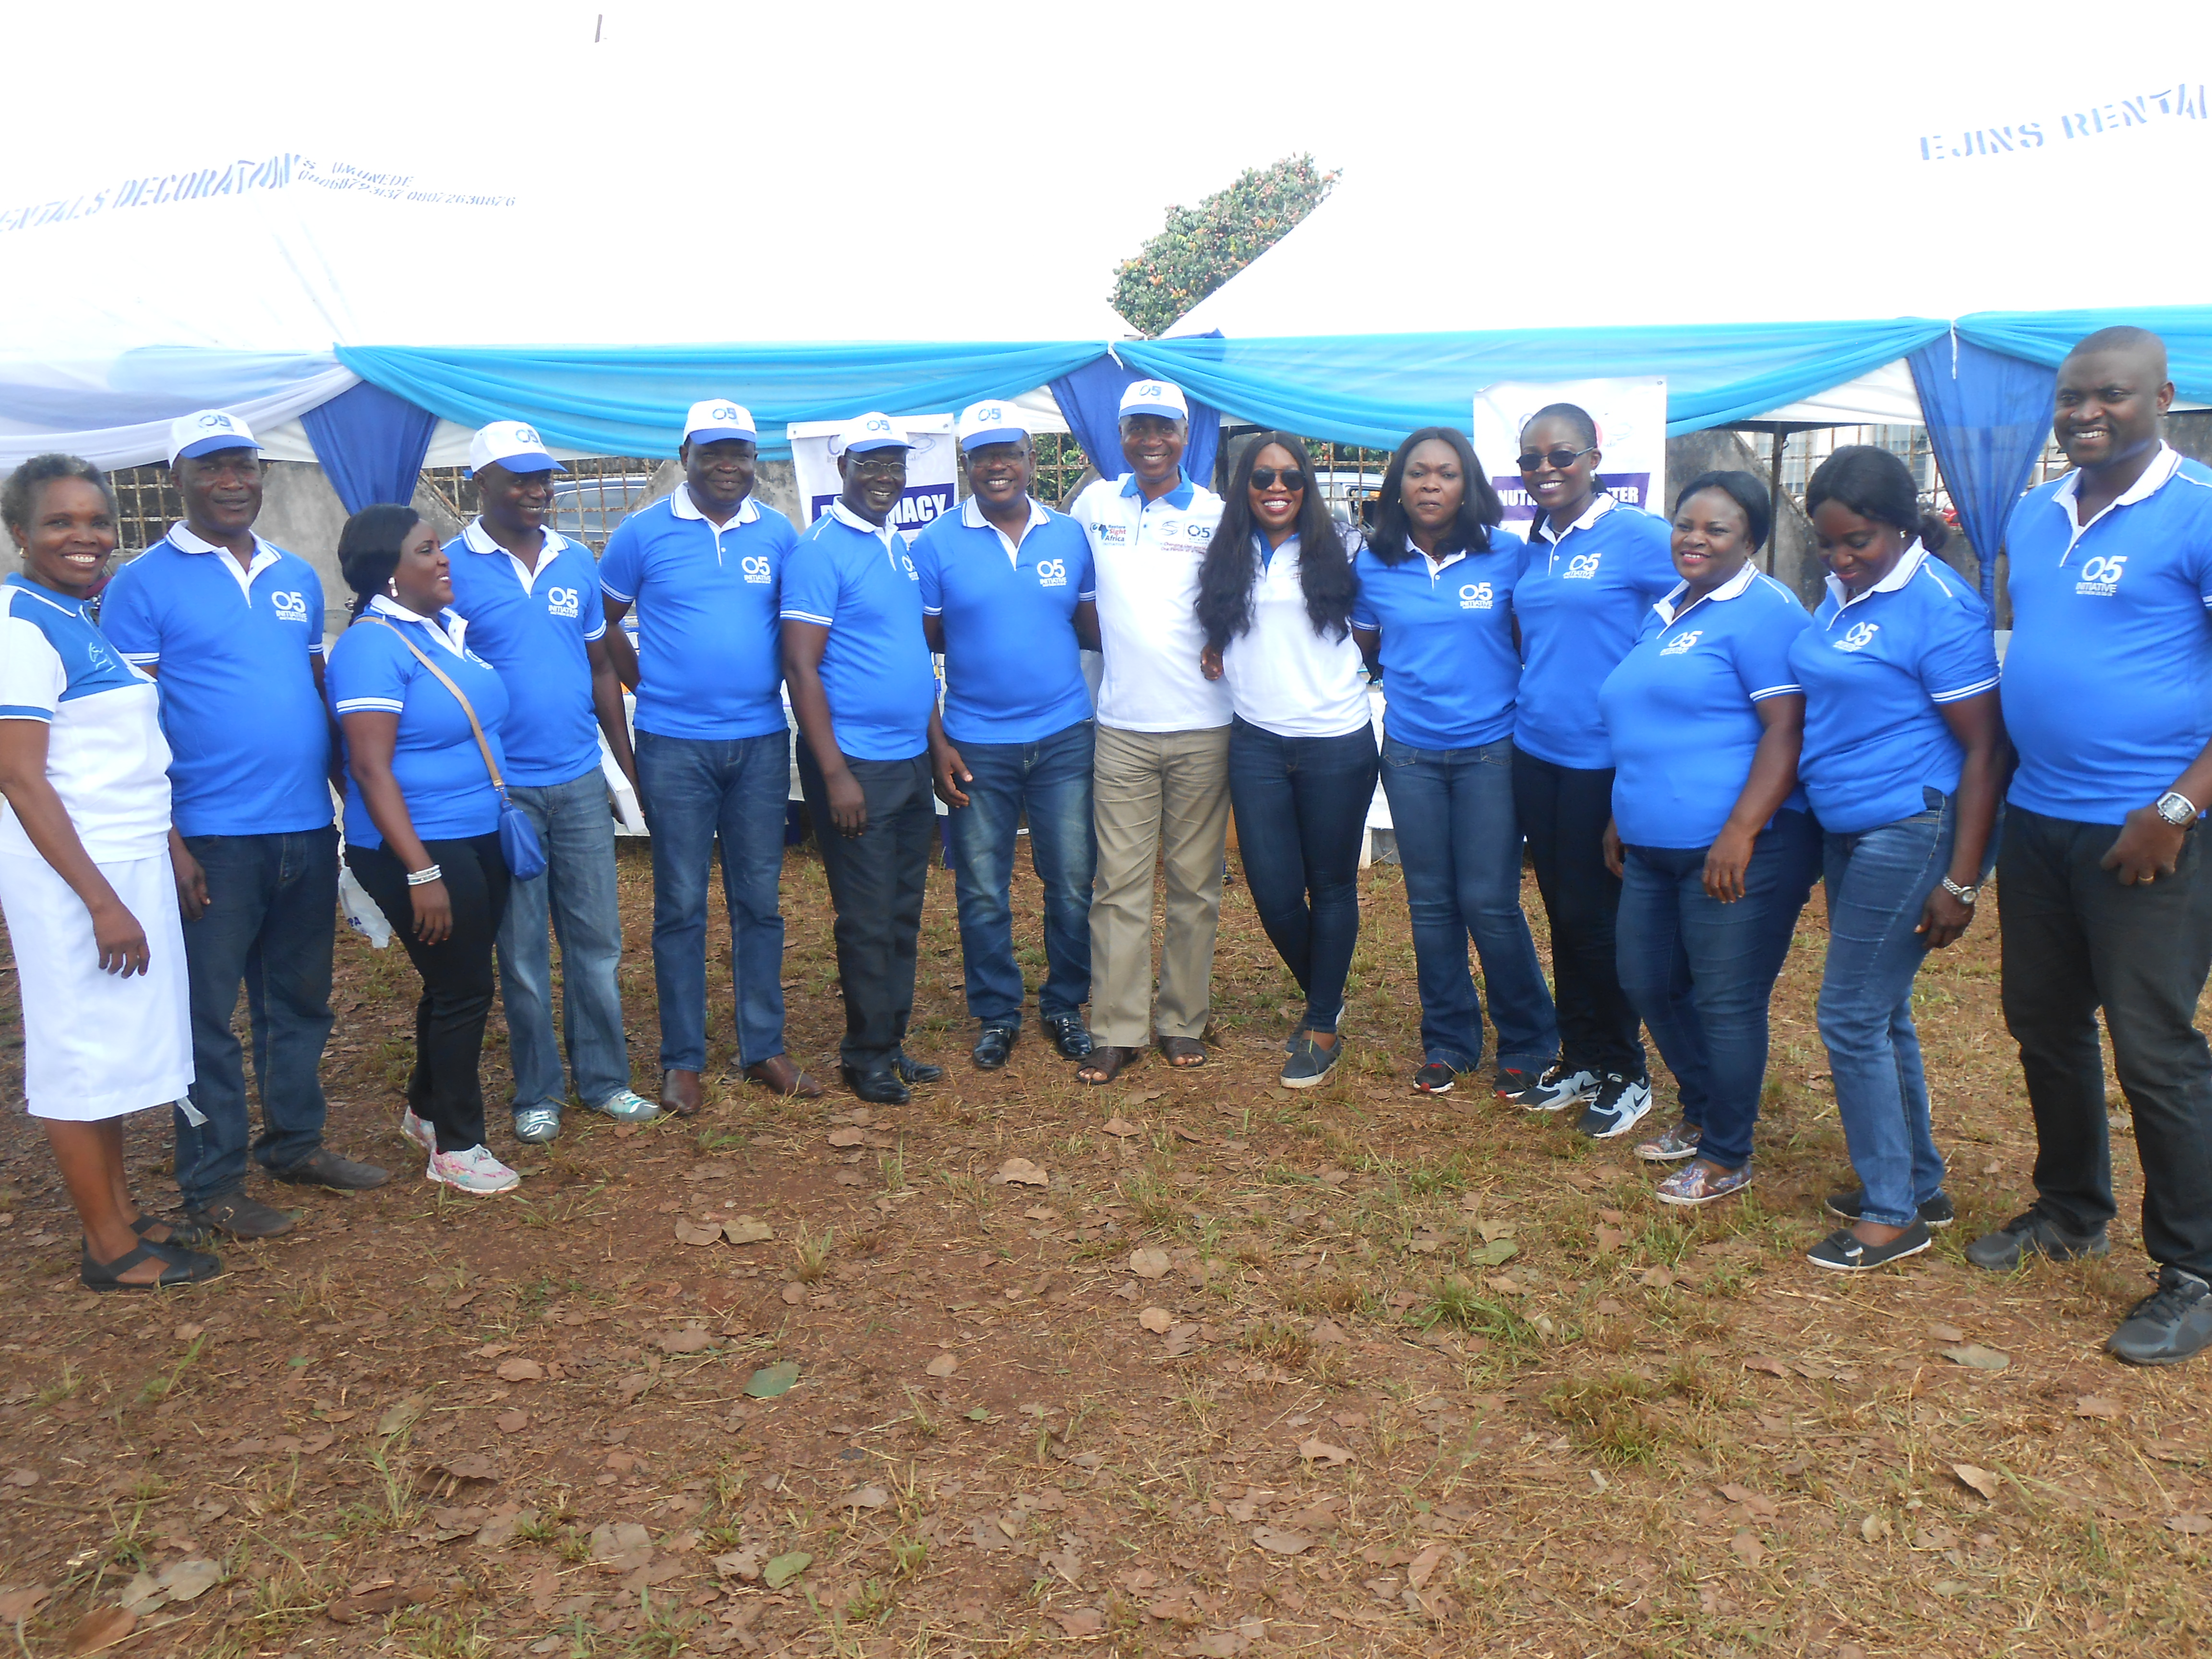 DSCN5257 LARGE TURNOUT AS DAME EDITH OKOWA FLAGS OFF GRASSROOT MEDICAL OUTREACH